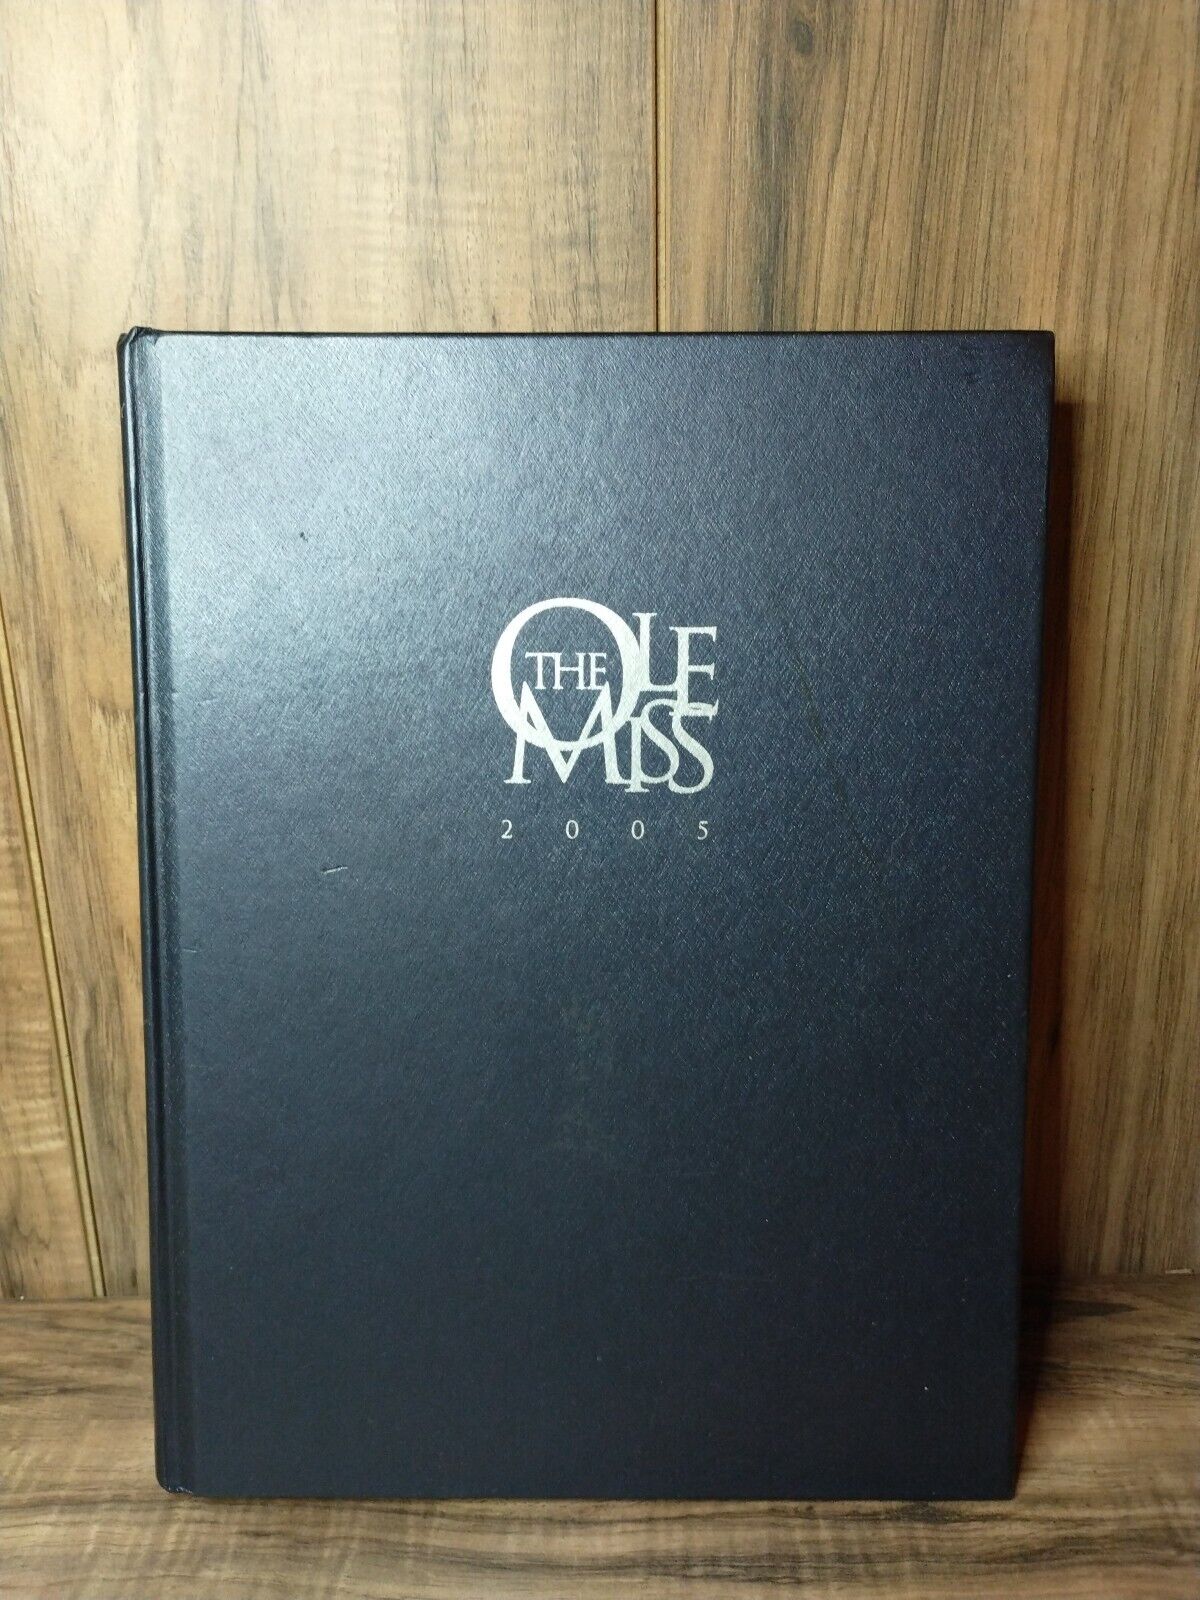 University of Mississippi Yearbook - The Ole Miss 2005, Vol. 109